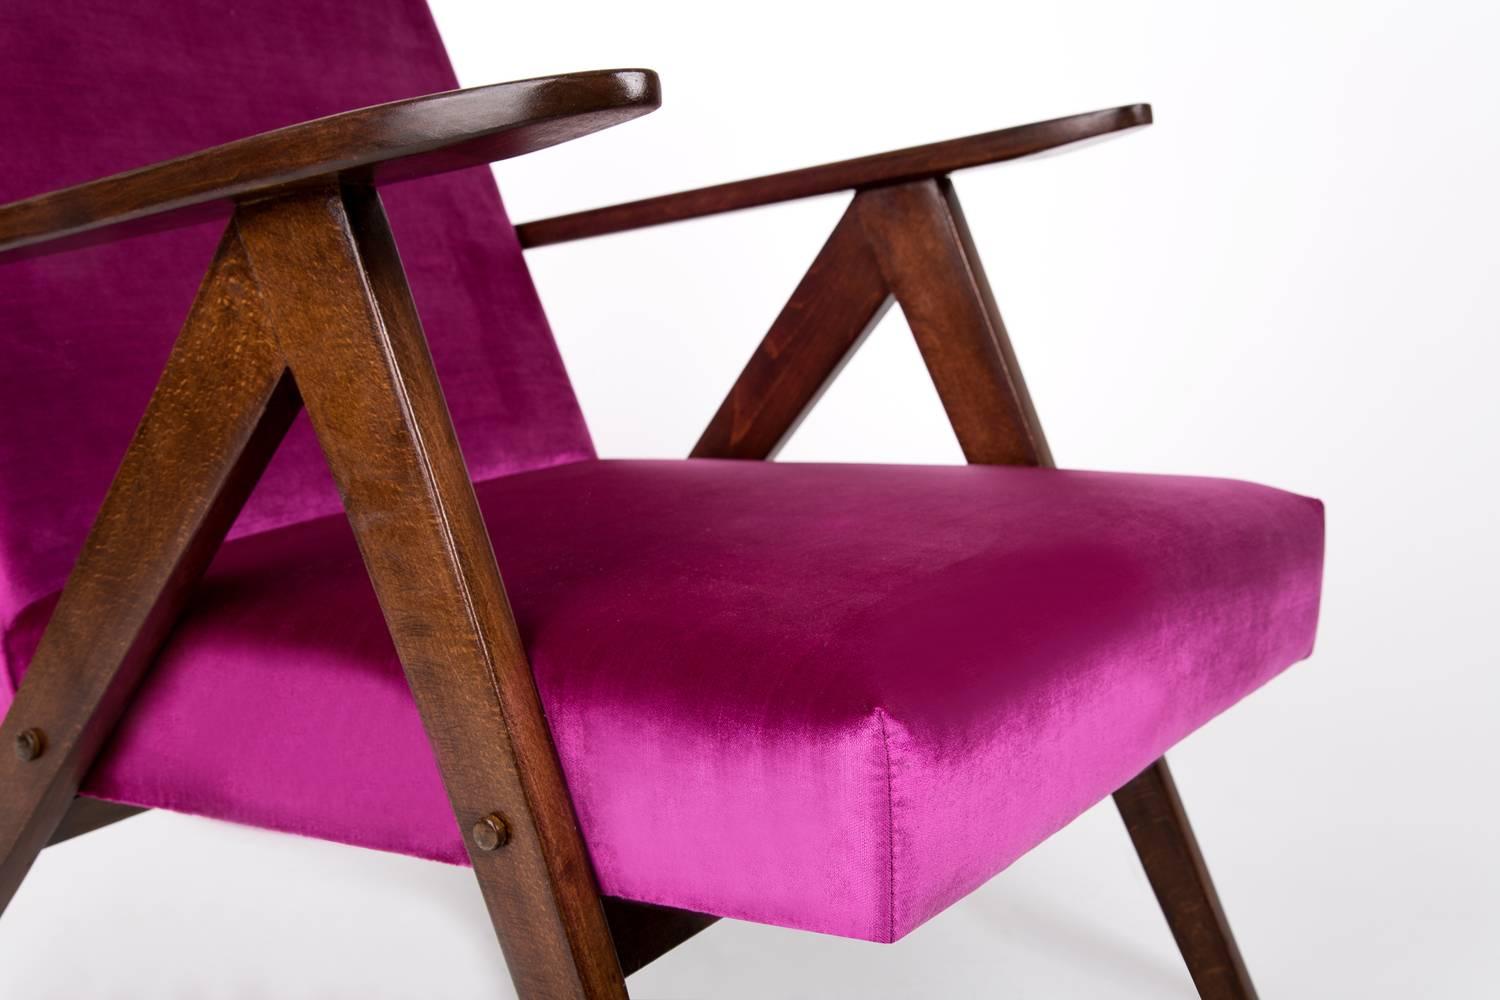 Set of Two Mid-Century Modern Magenta Pink Armchairs, 1960s, Poland For Sale 1